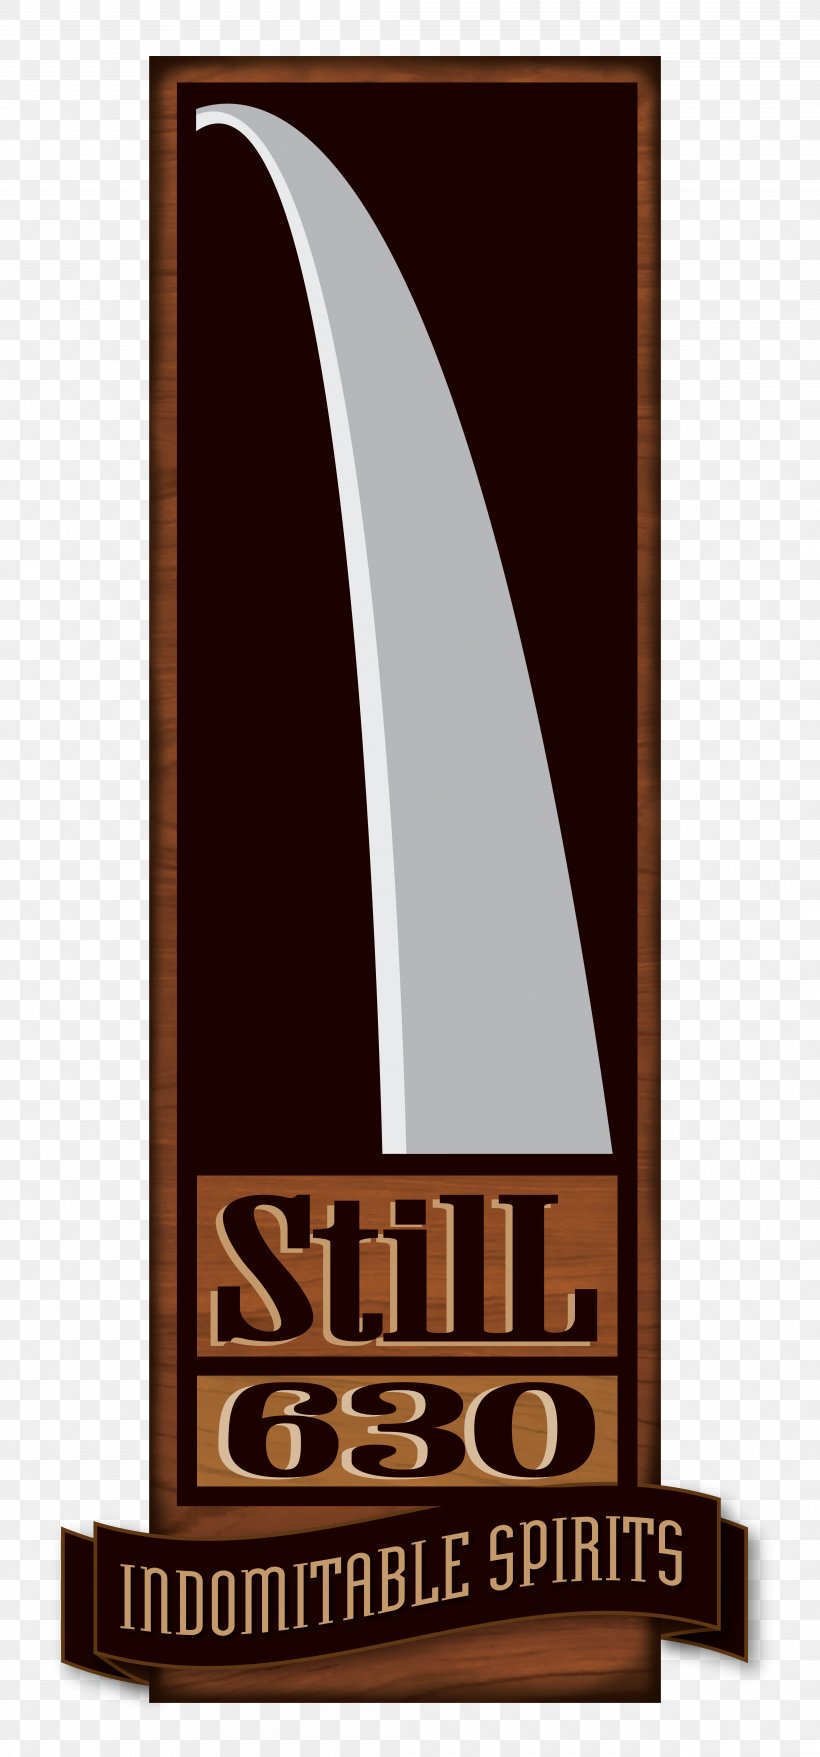 Brand StilL 630 Distillery Industry Drink Logo, PNG, 4200x9000px, Brand, Cocktail, Drink, Food, Industry Download Free